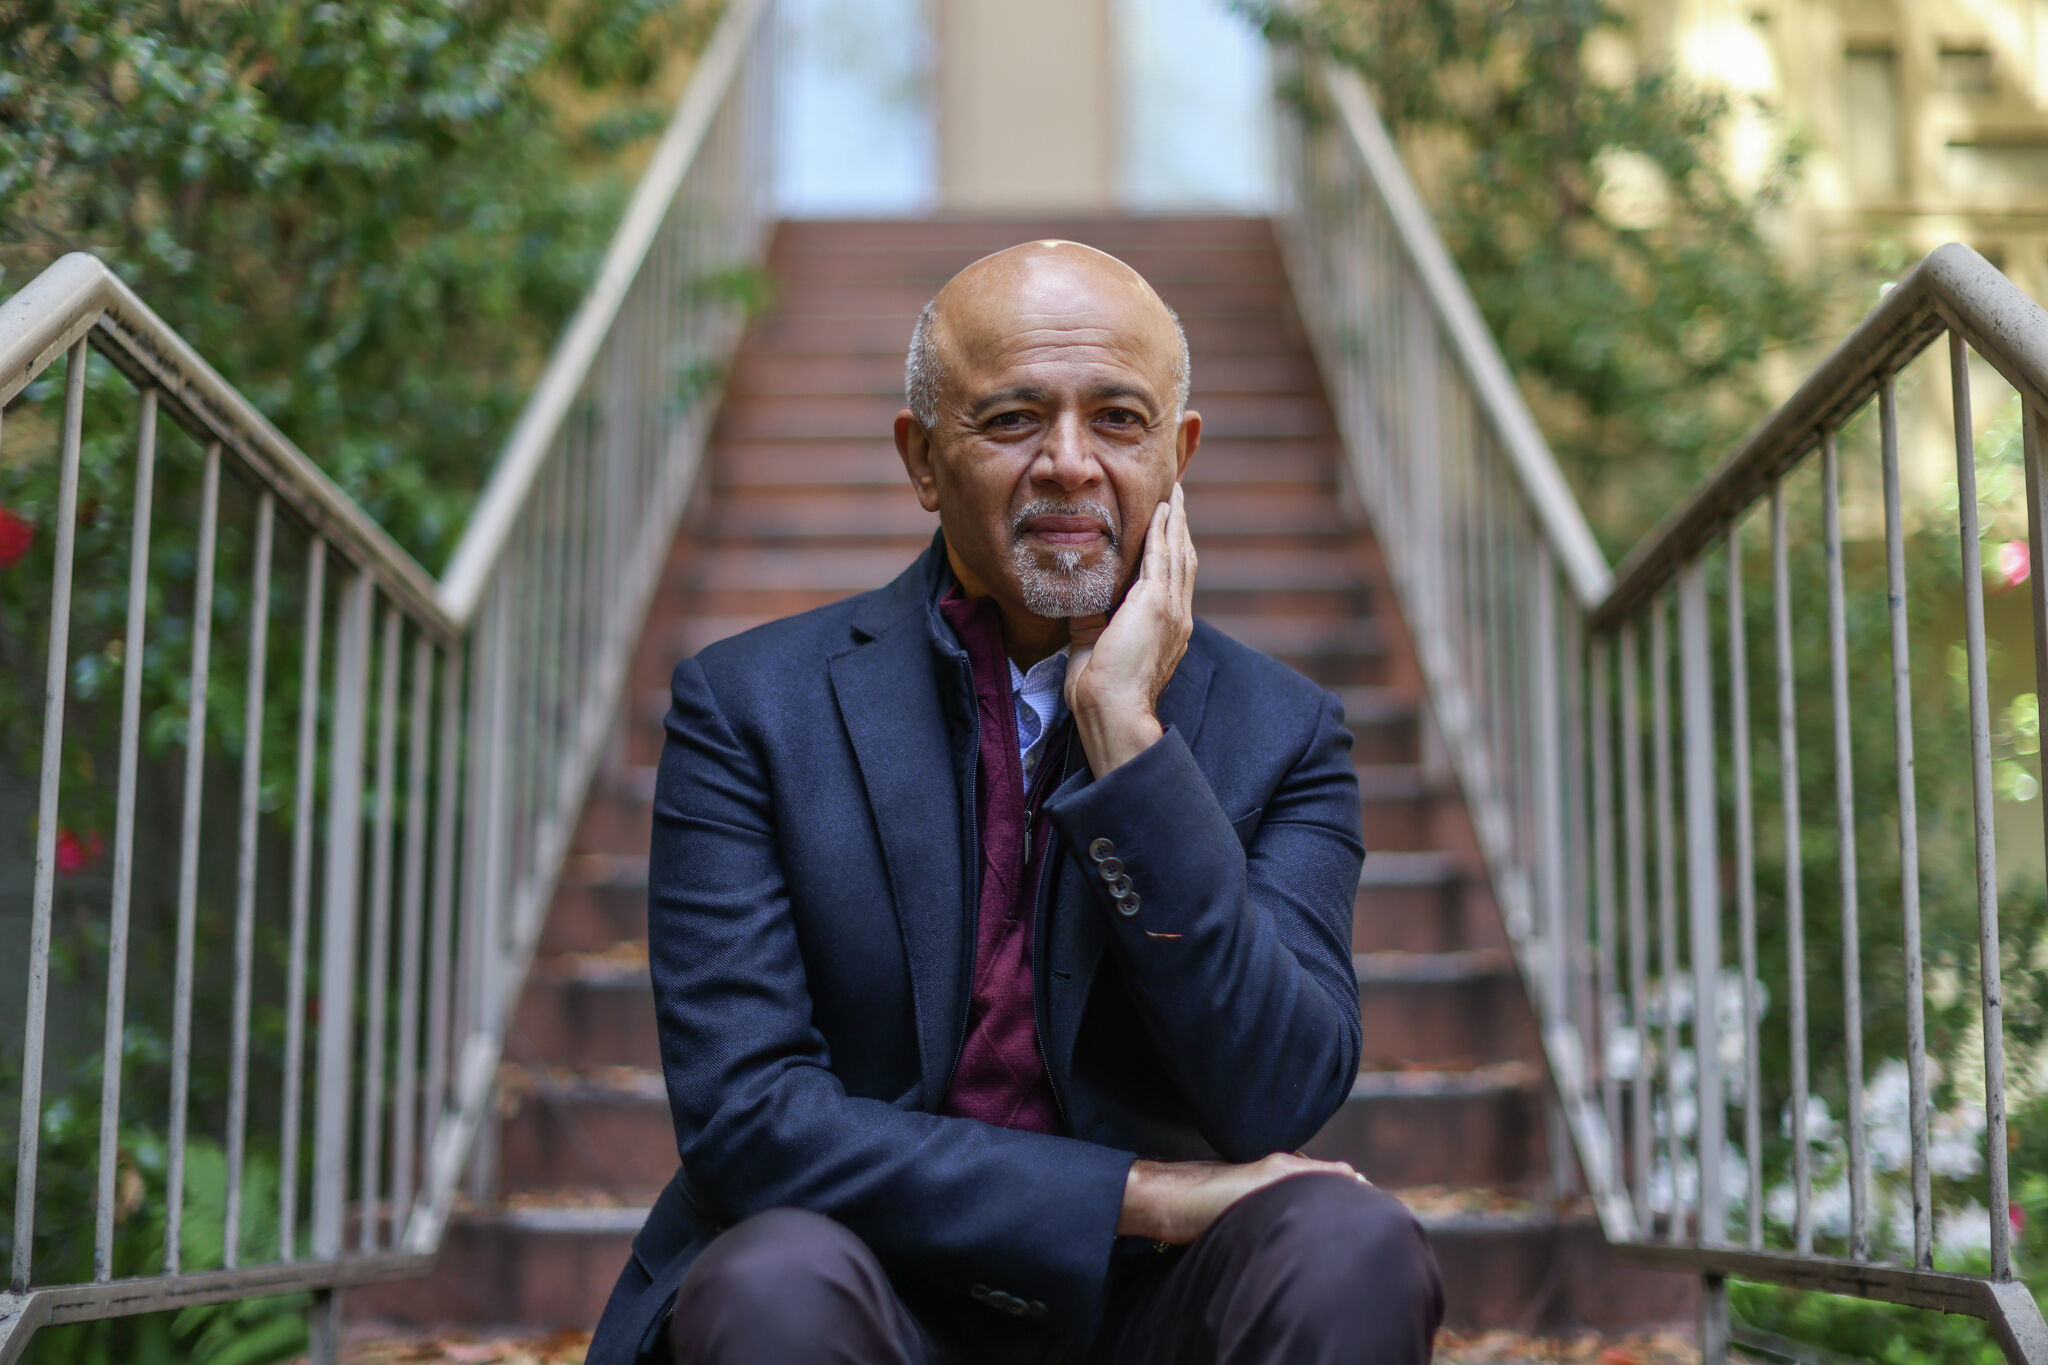 Abraham Verghese among the authors at Houston book events this week